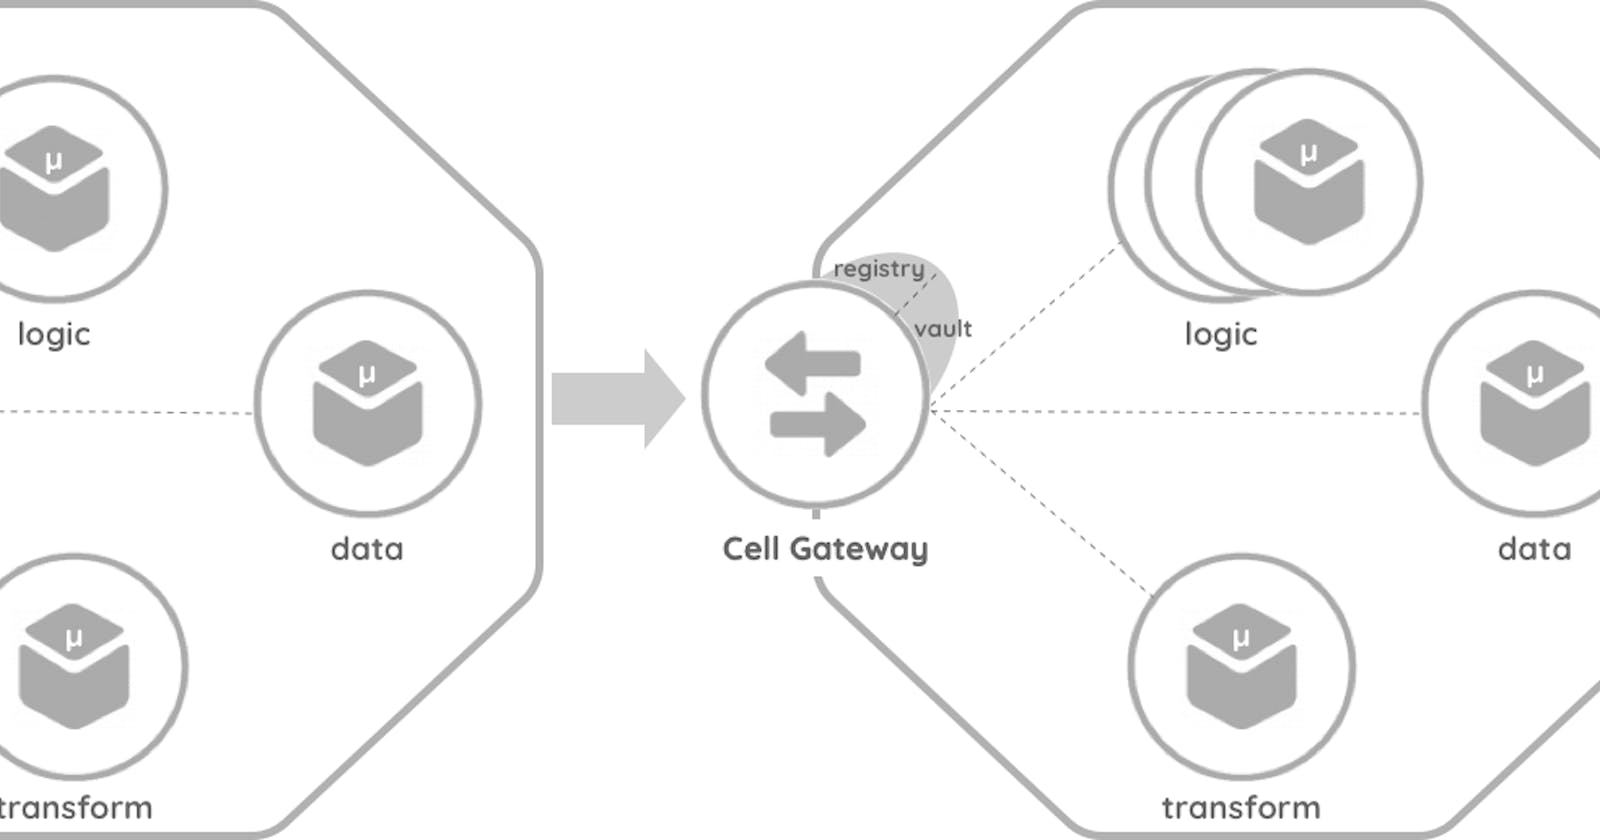 Cell-Based Architecture and Federated Microservices